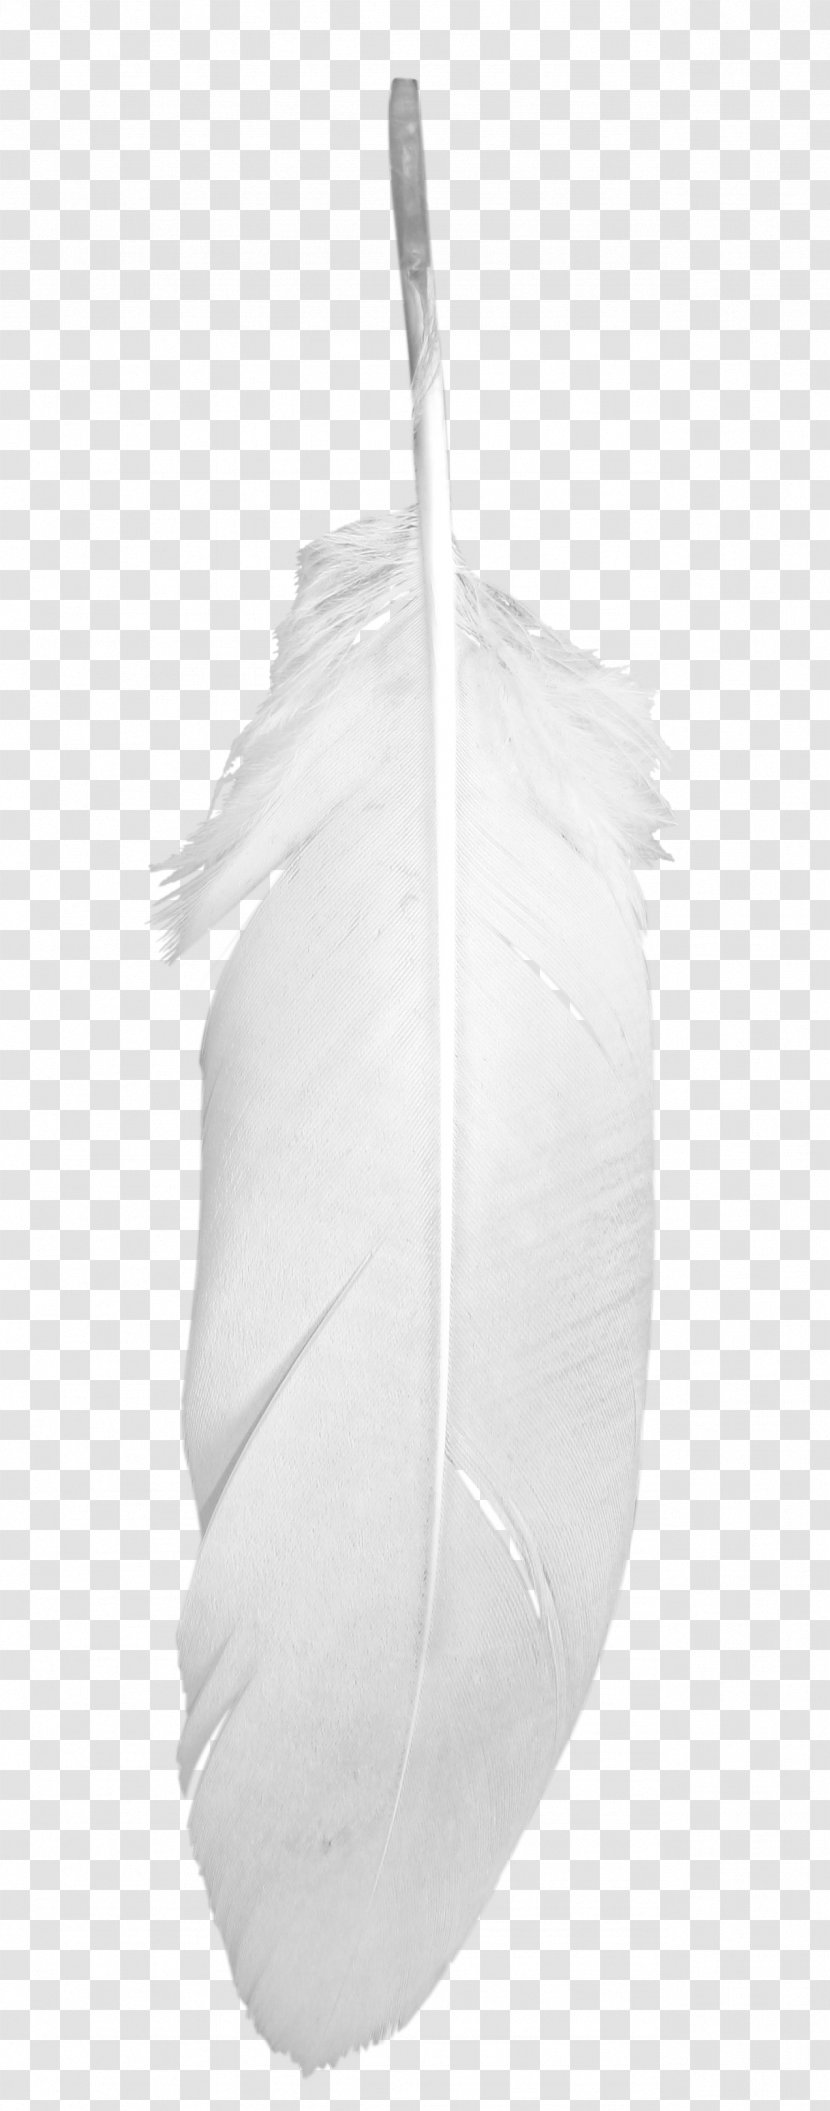 White Feather Euclidean Vector - Monochrome - Beautiful Feathers Transparent PNG